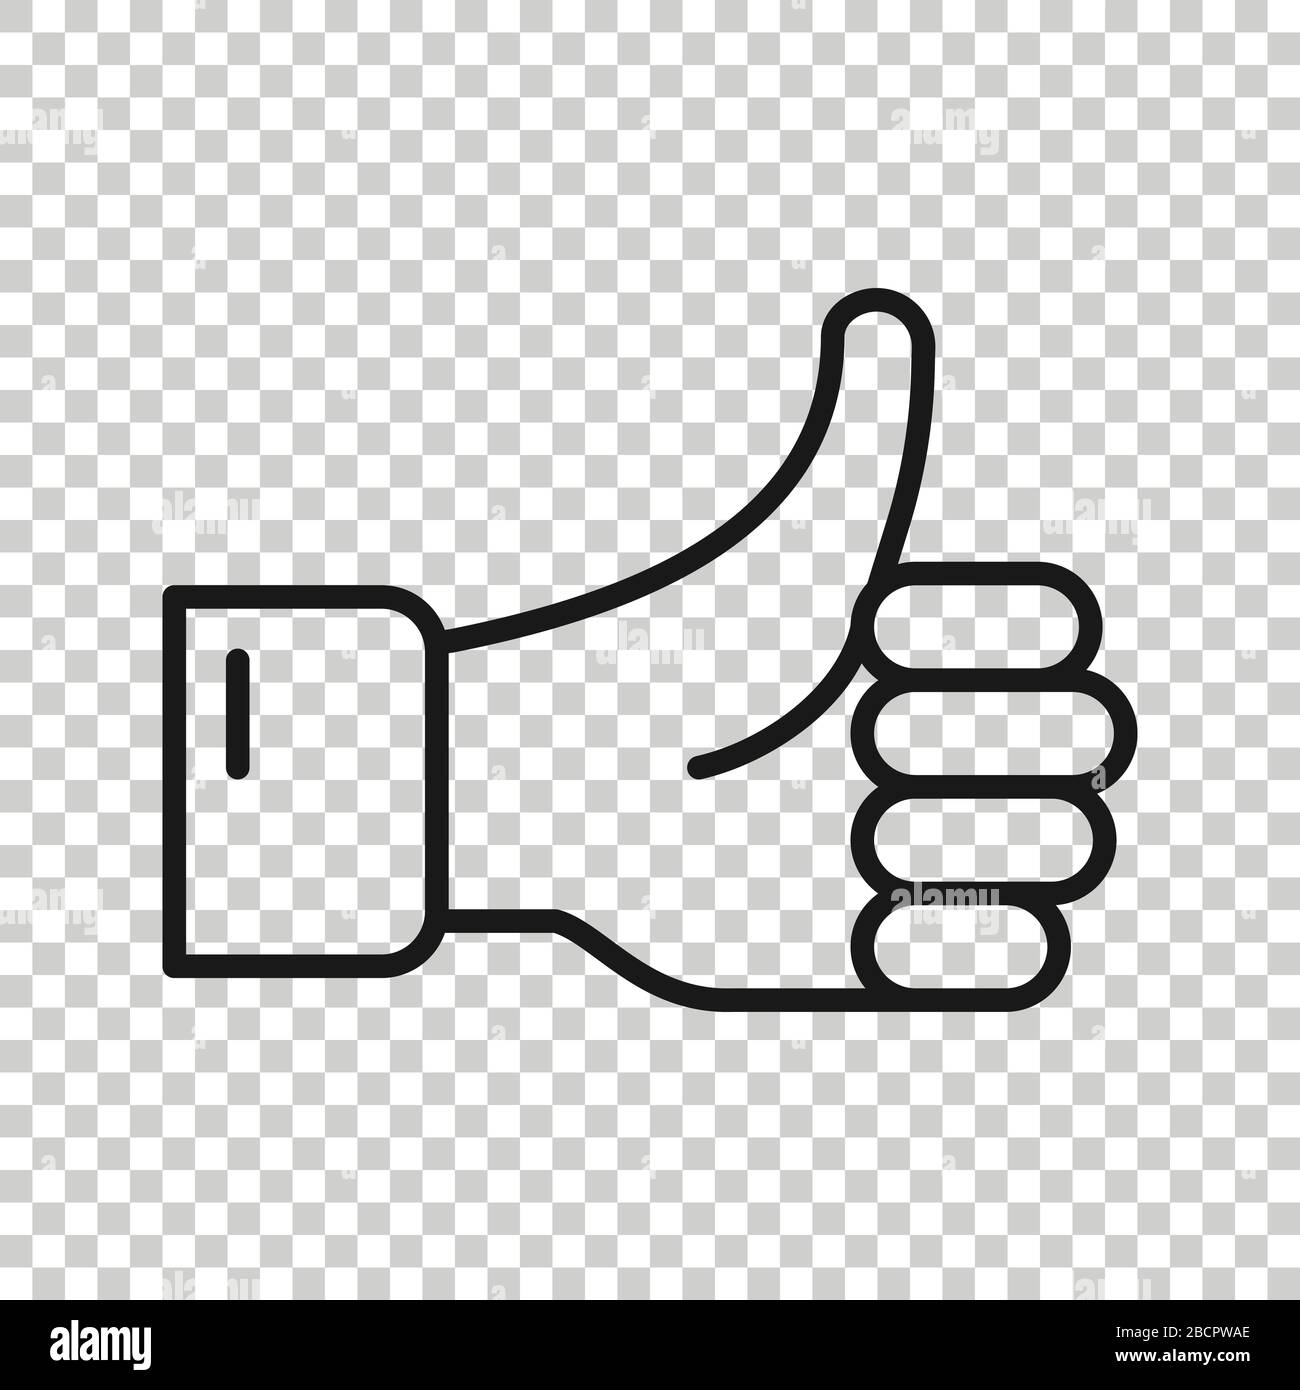 Thumb up icon in flat style. Like gesture vector illustration on white isolated background. Approval mark business concept. Stock Vector